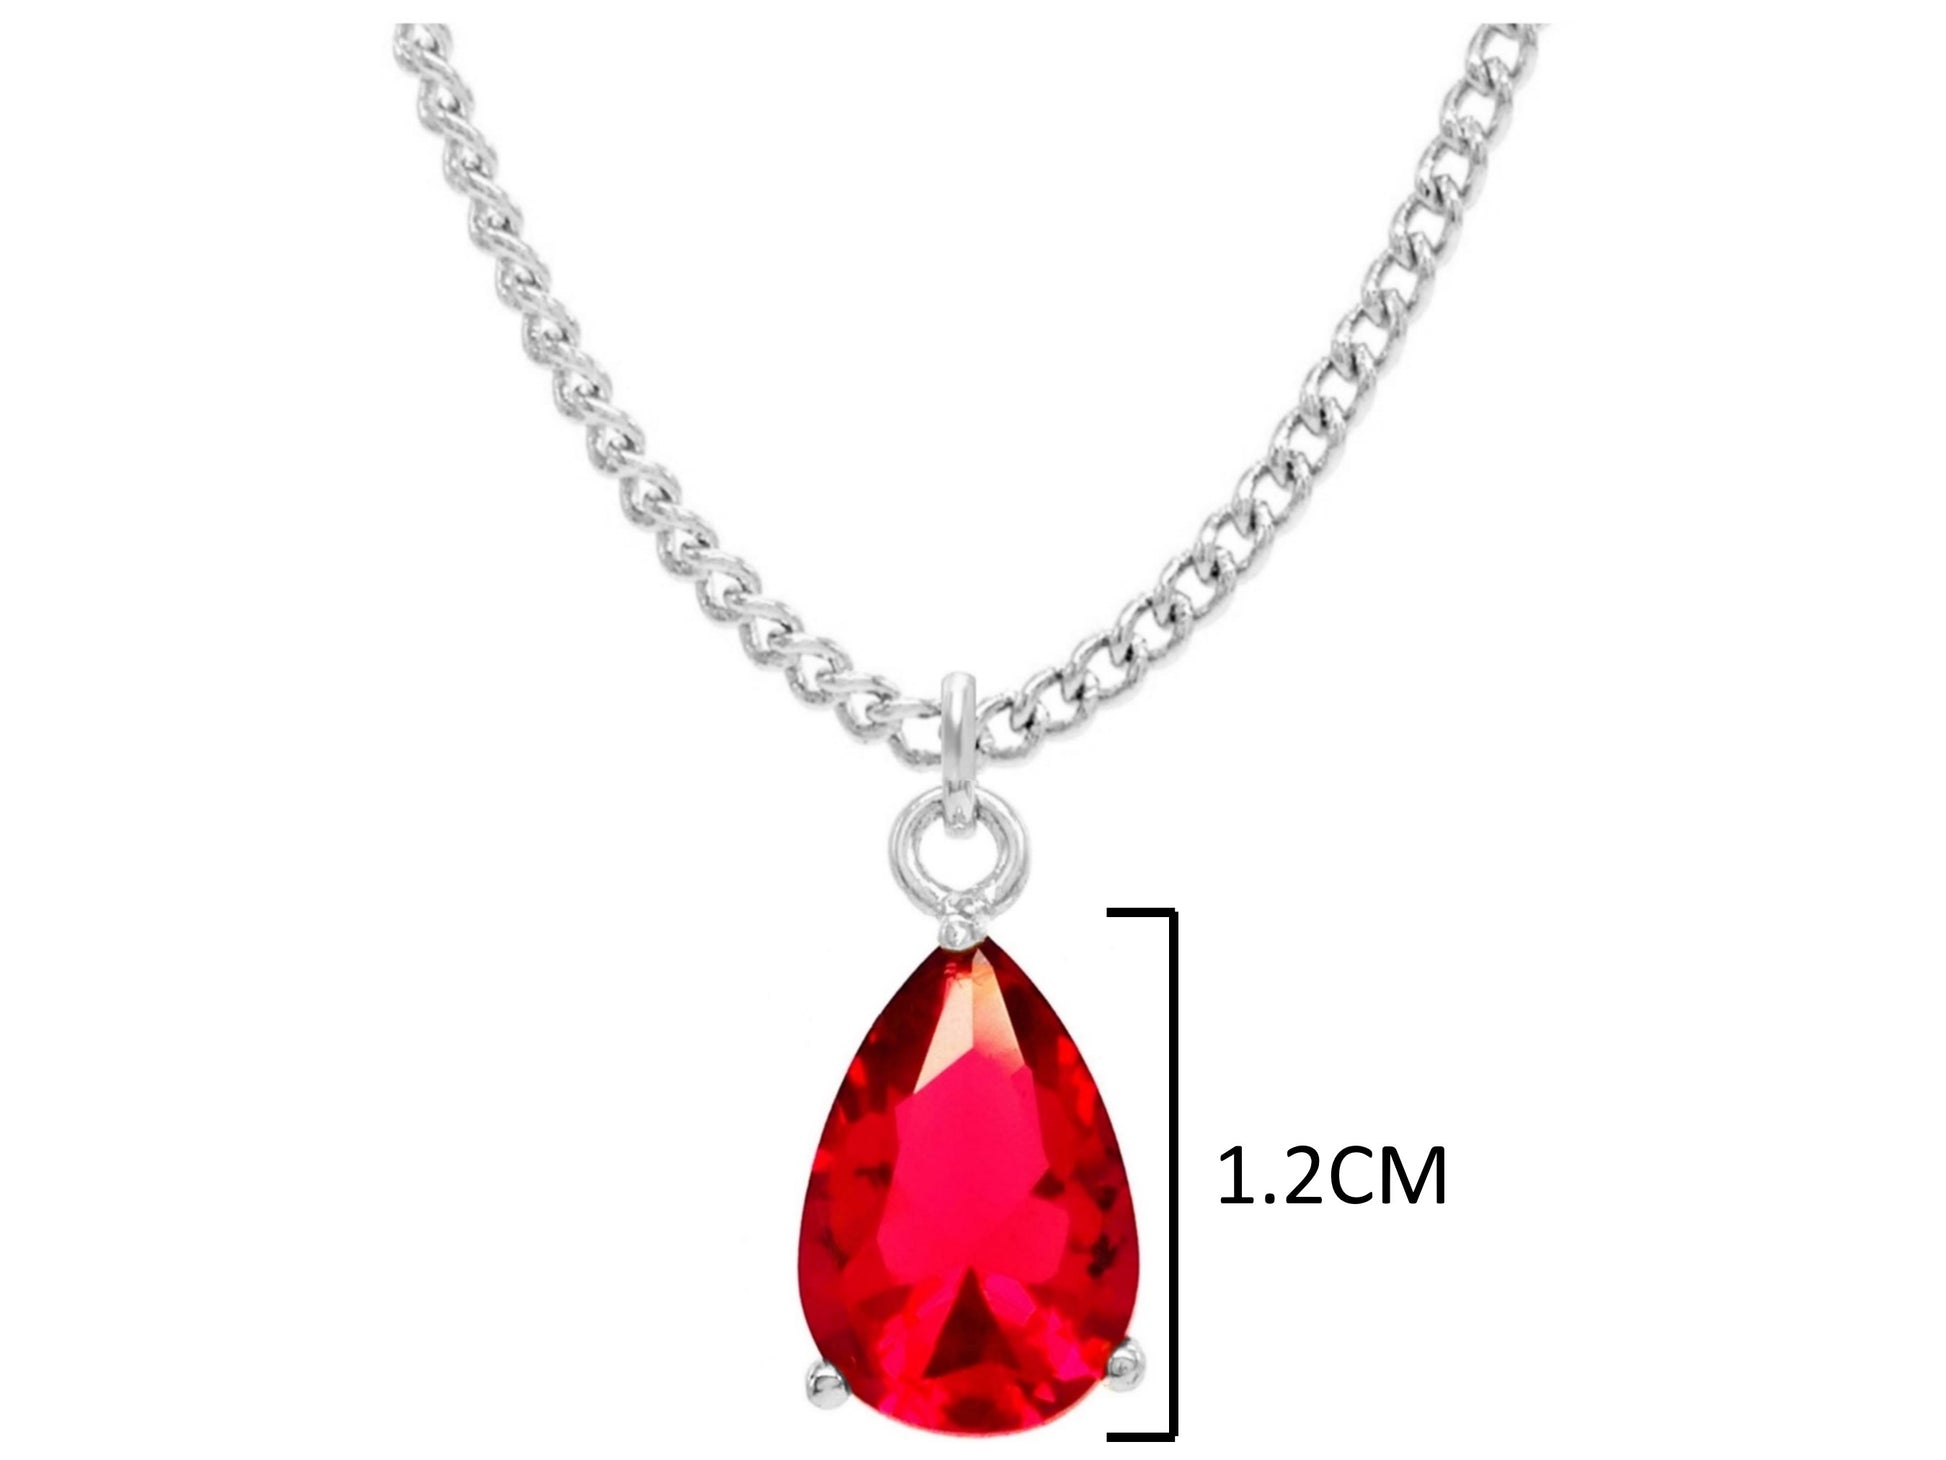 White gold red pear gem necklace and earrings MEASUREMENT